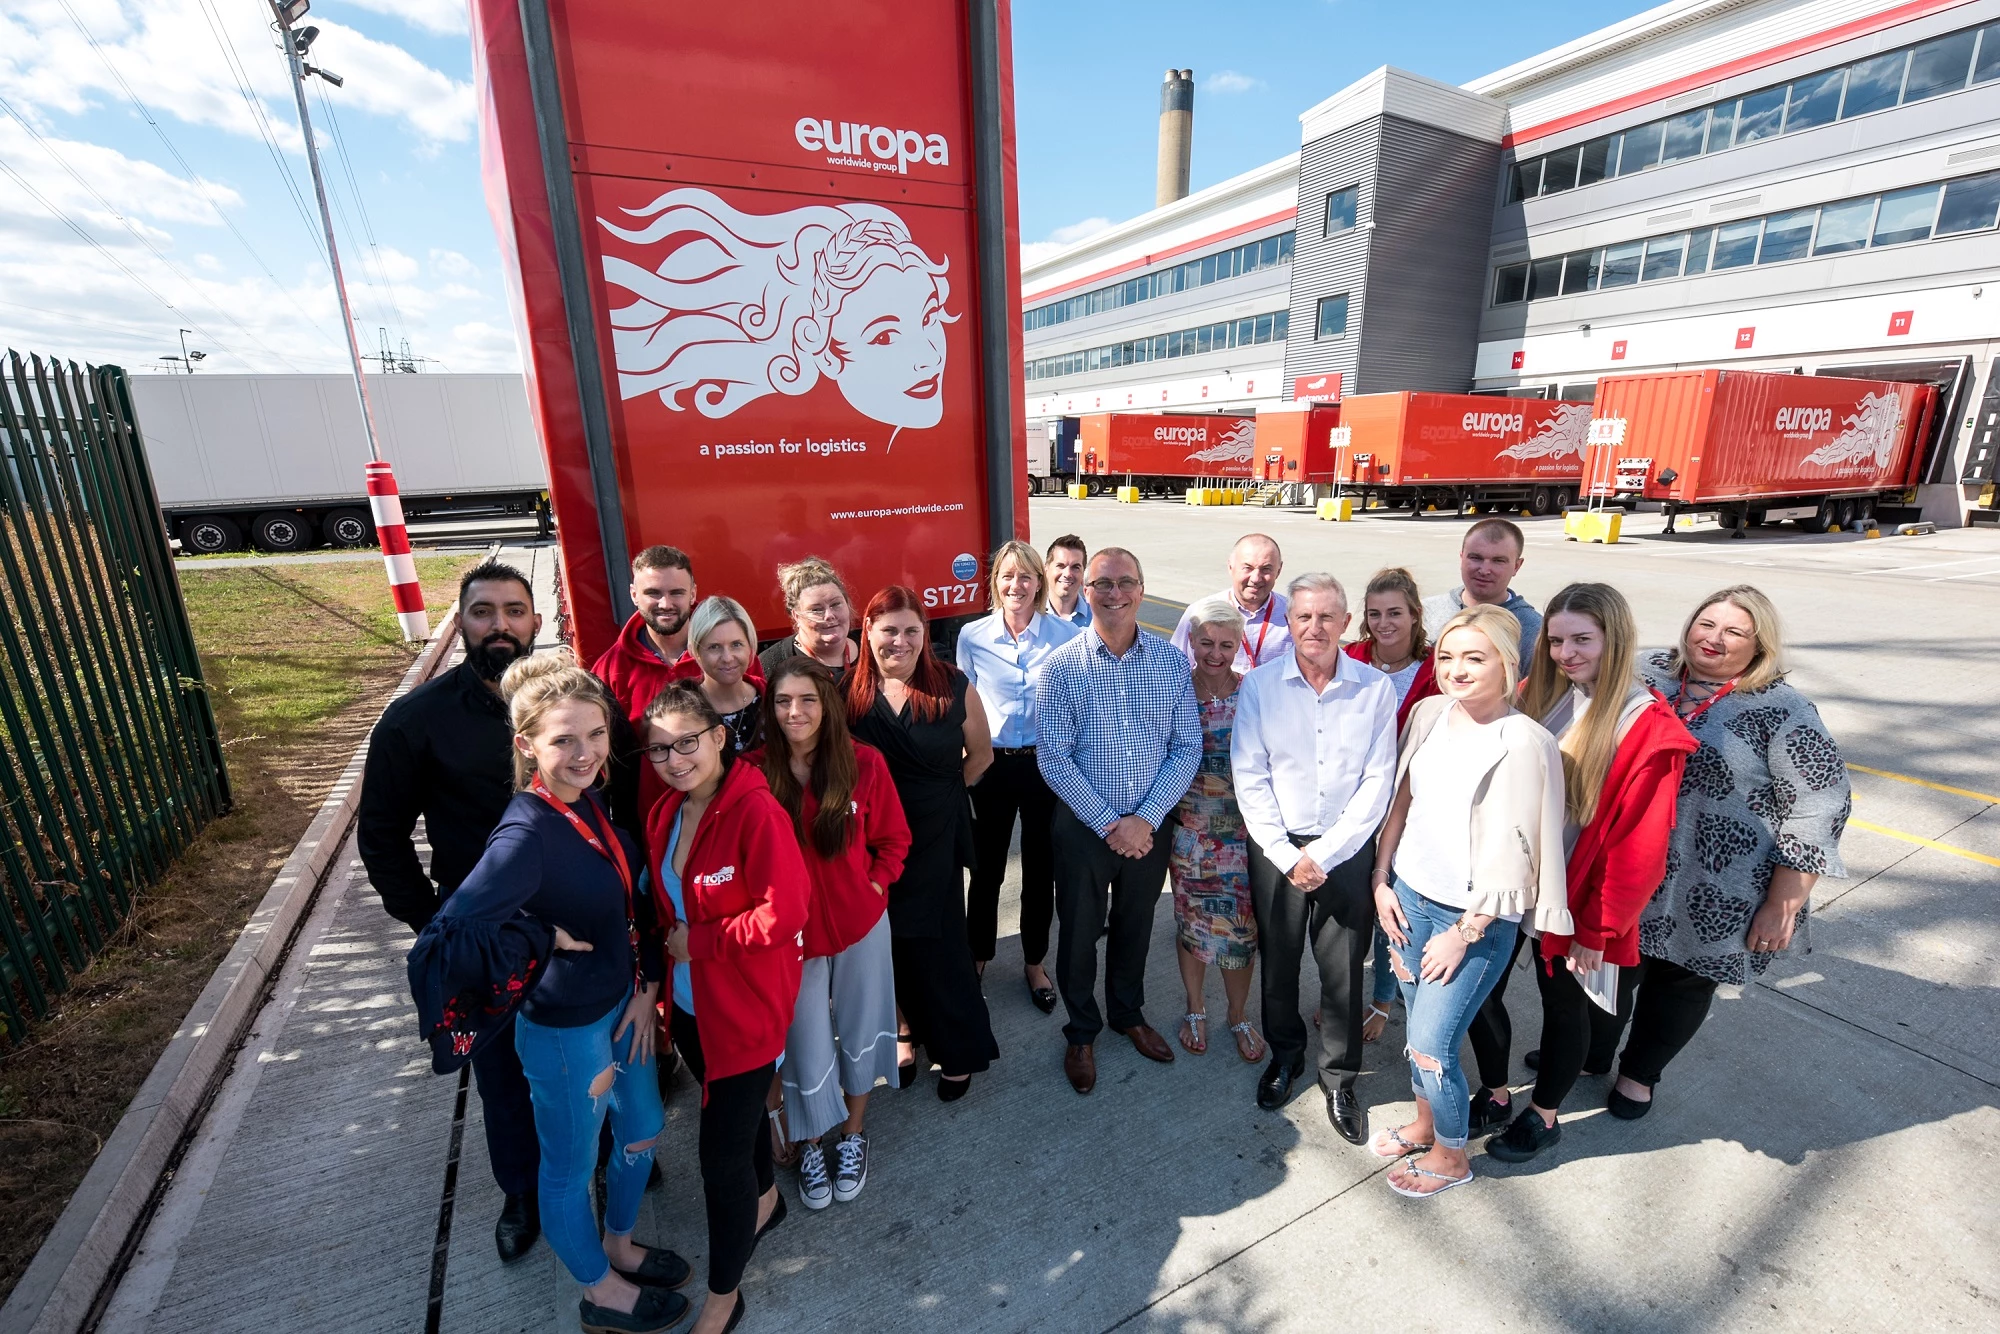 Europa Road Dartford Branch Manager Peter Salter and Customer Service Manager Ann Burgess with their team at Europa's headquarters in Dartford